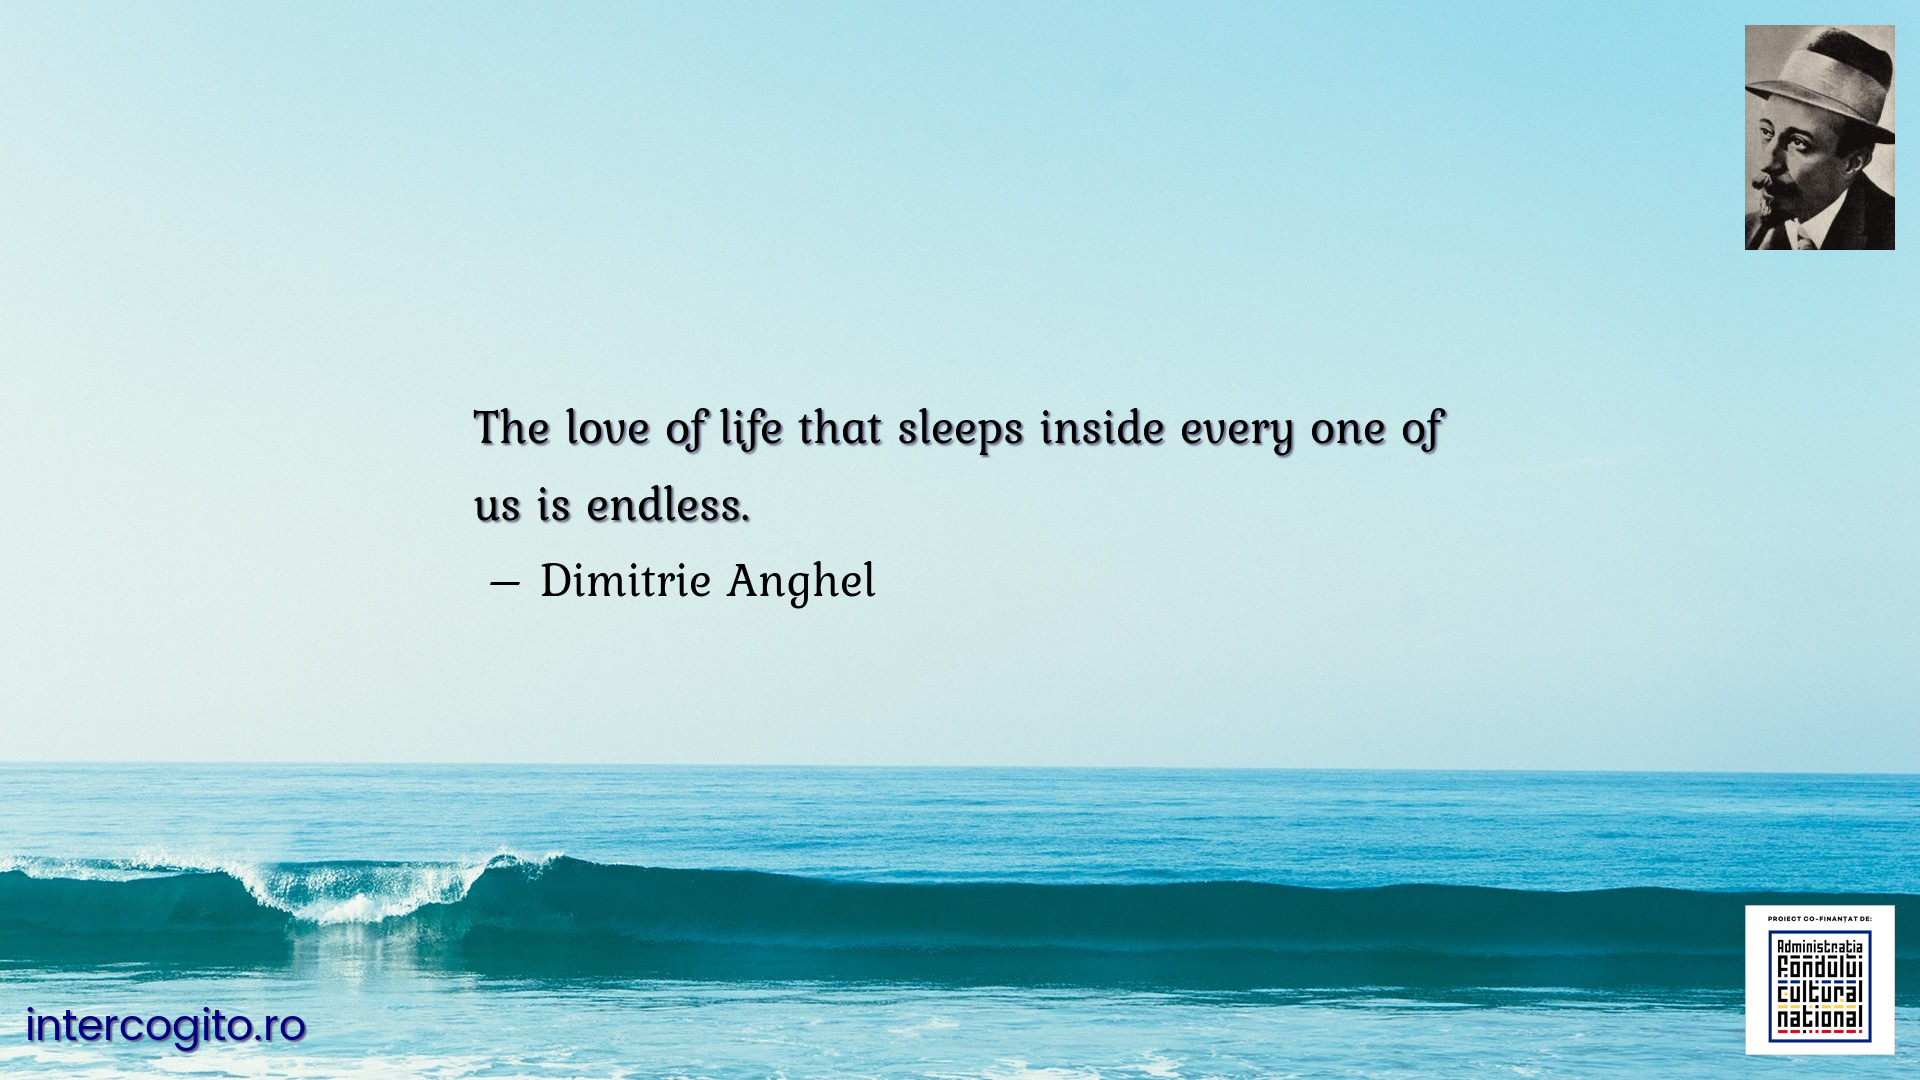 The love of life that sleeps inside every one of us is endless.